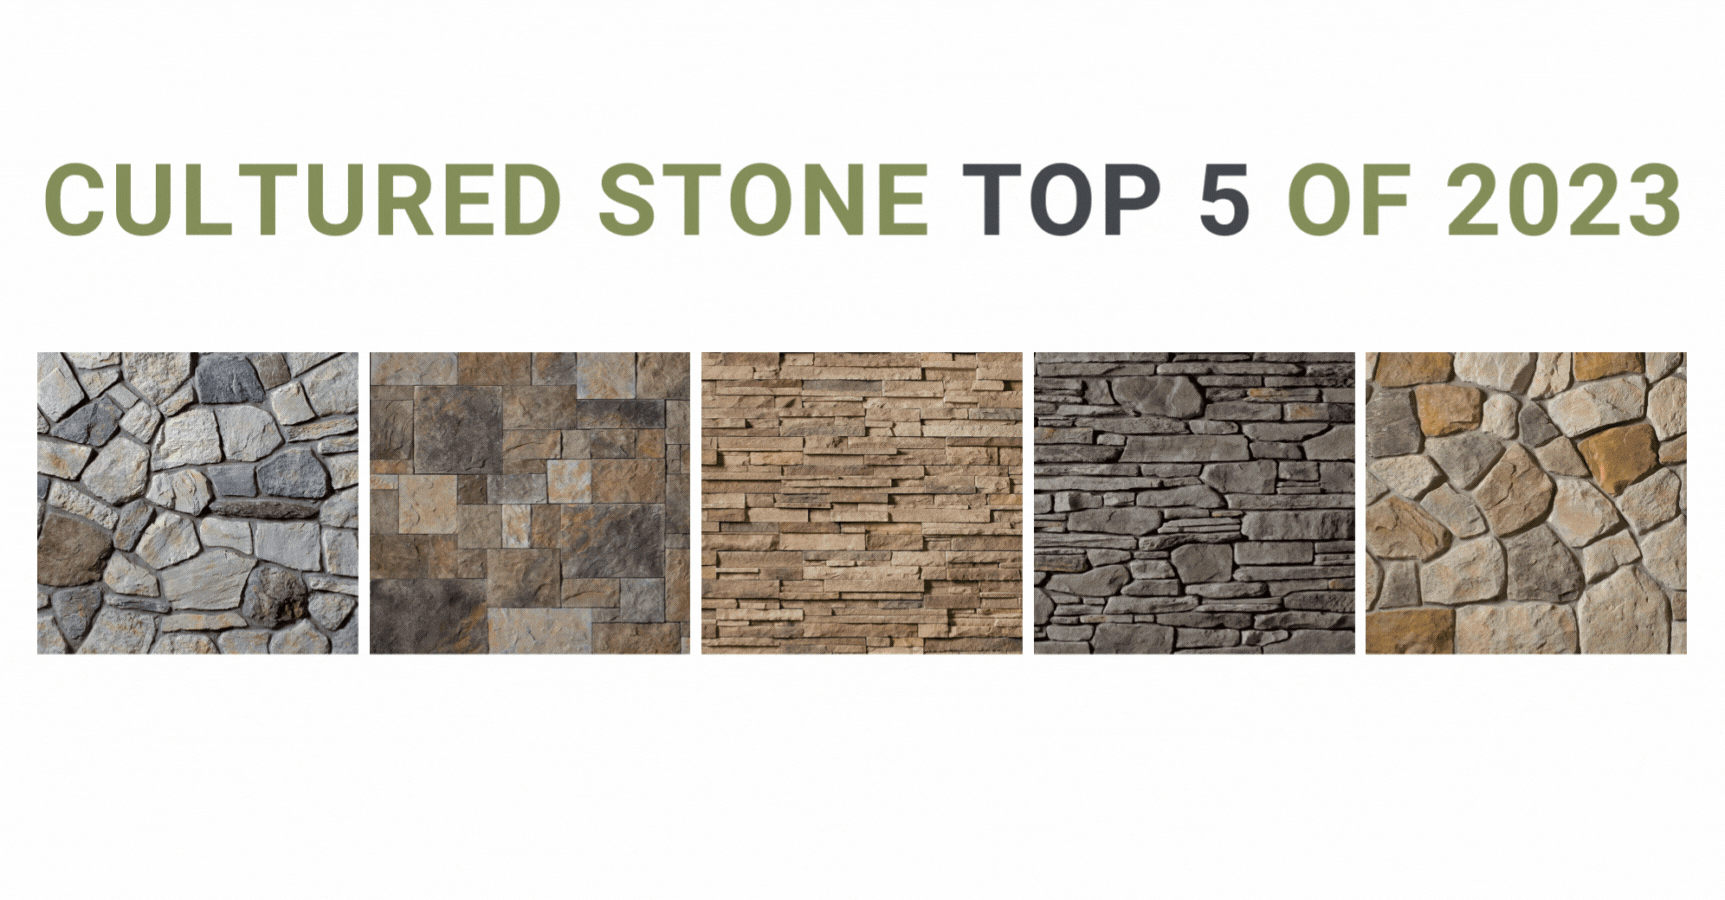 Cultured stone by Instone